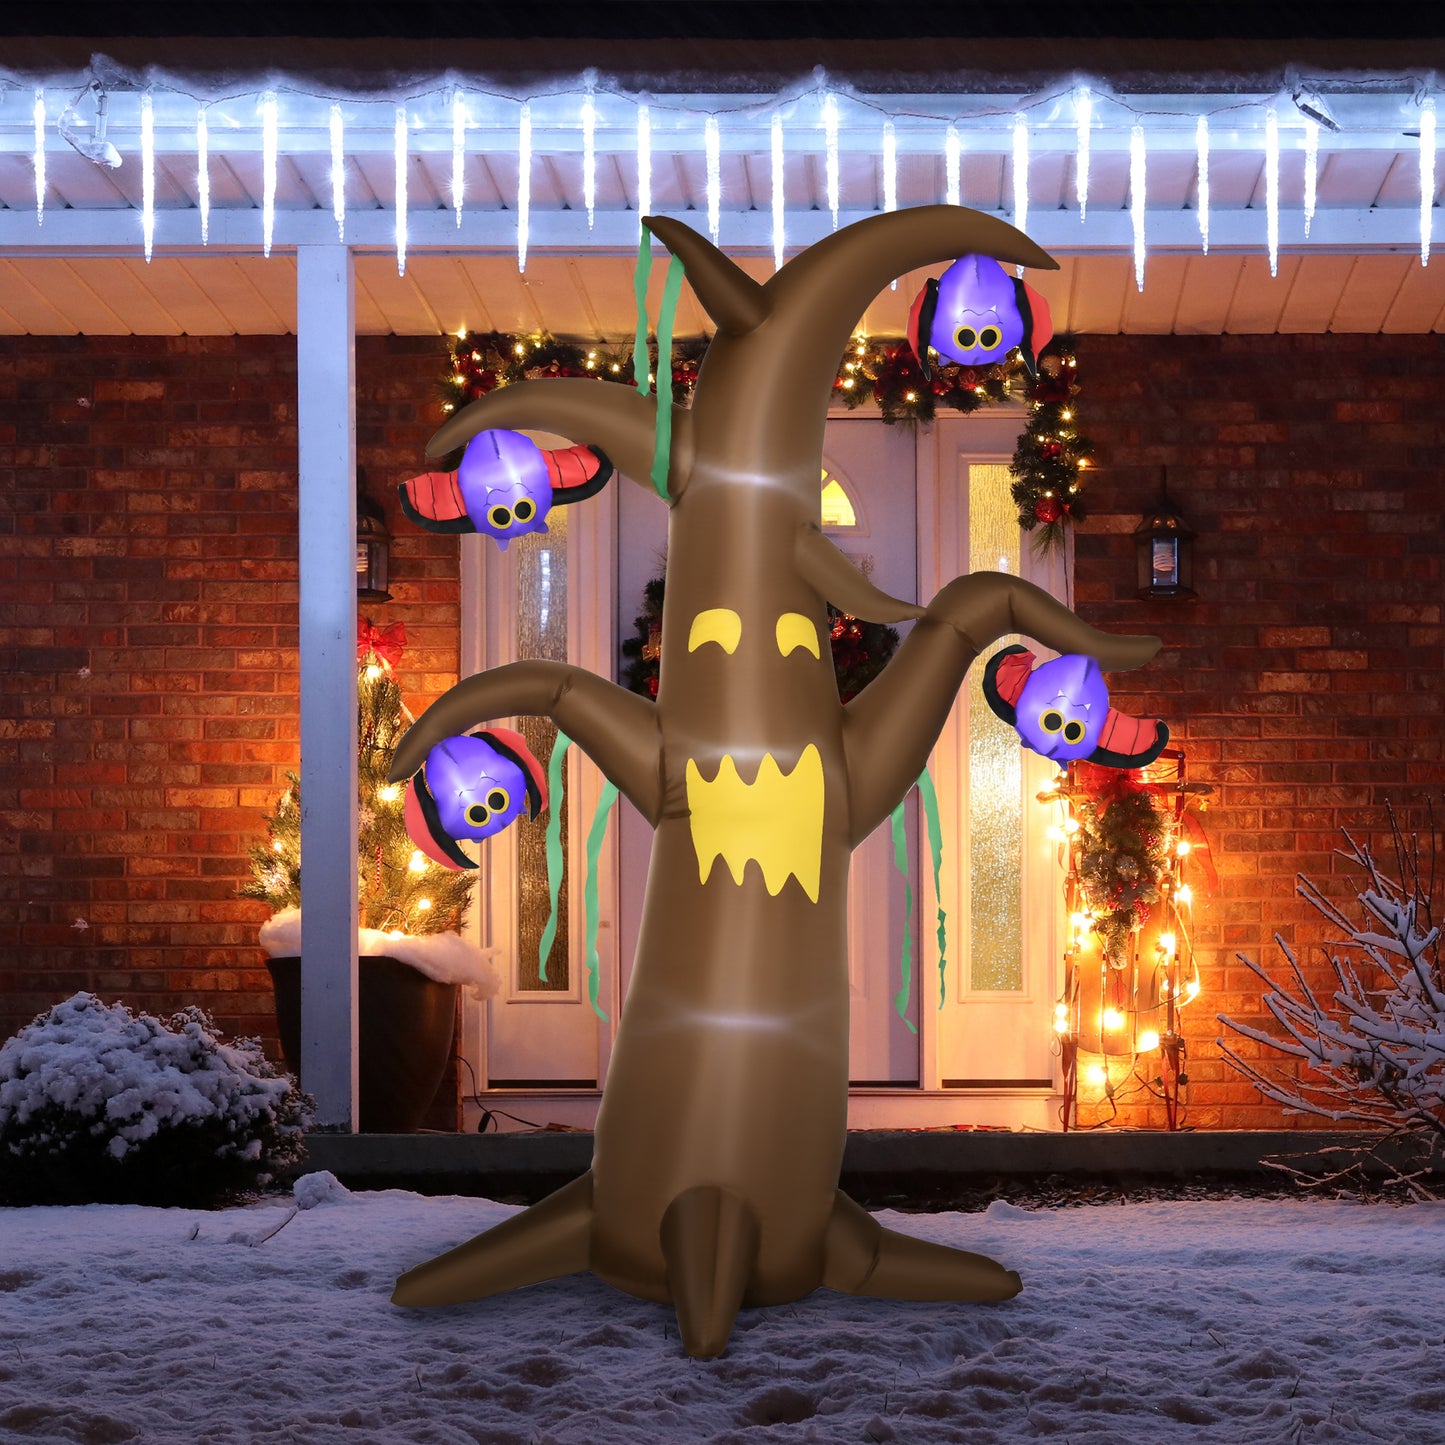 Outsunny 8ft Inflatable Halloween Ghost Tree with Upside-down Bats Showing Teeth Wings, Blow-Up Outdoor LED Display for Lawn, Garden, Party